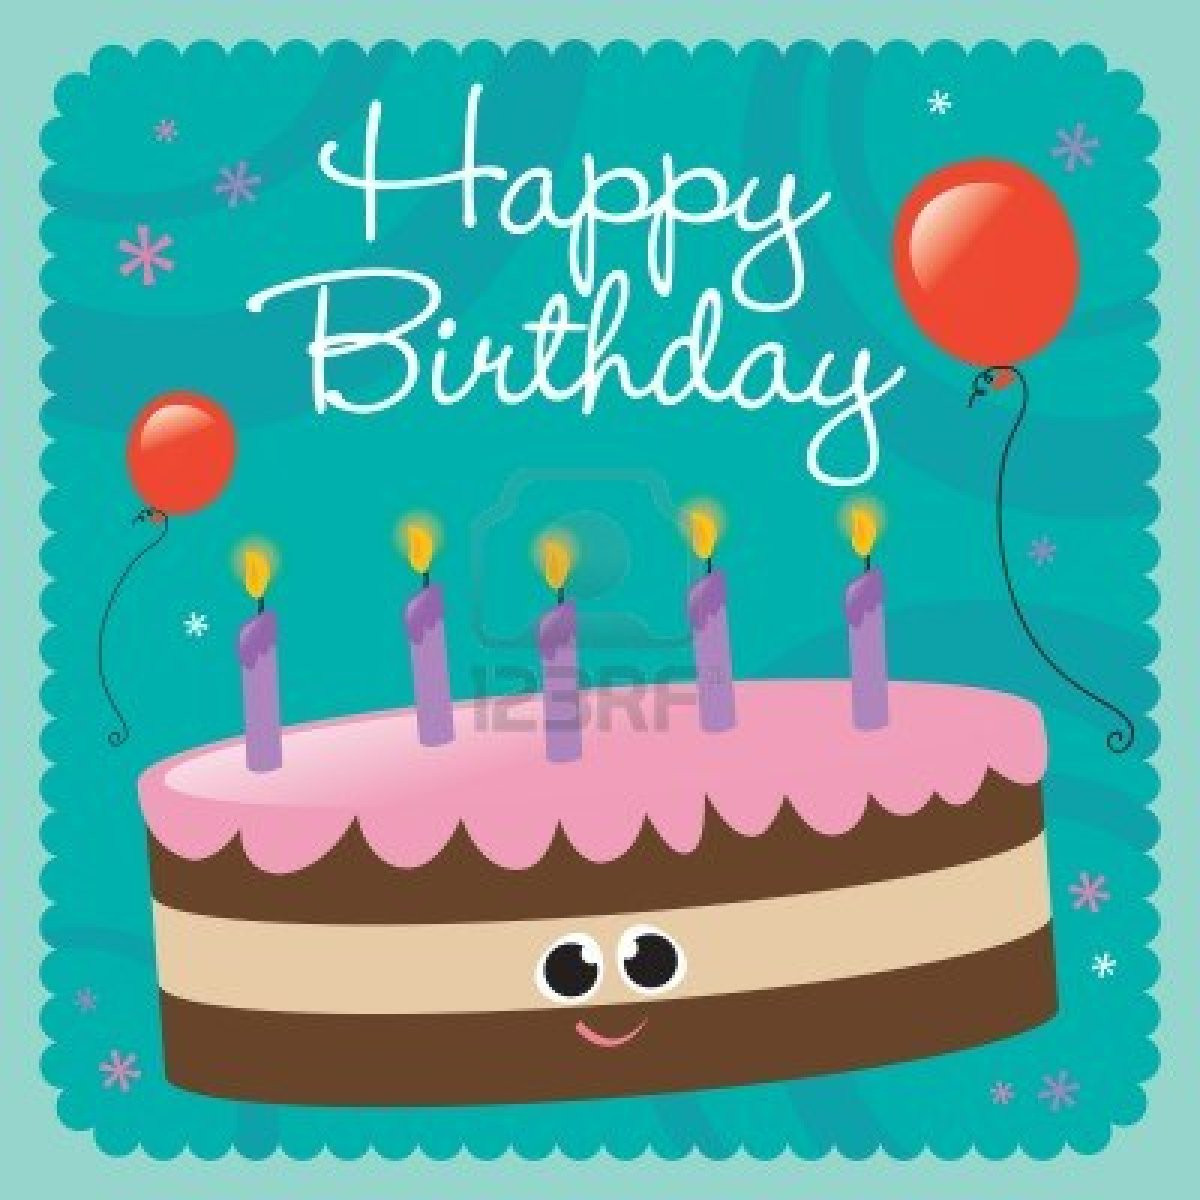 Free Birthday Cards Download
 35 Happy Birthday Cards Free To Download – The WoW Style